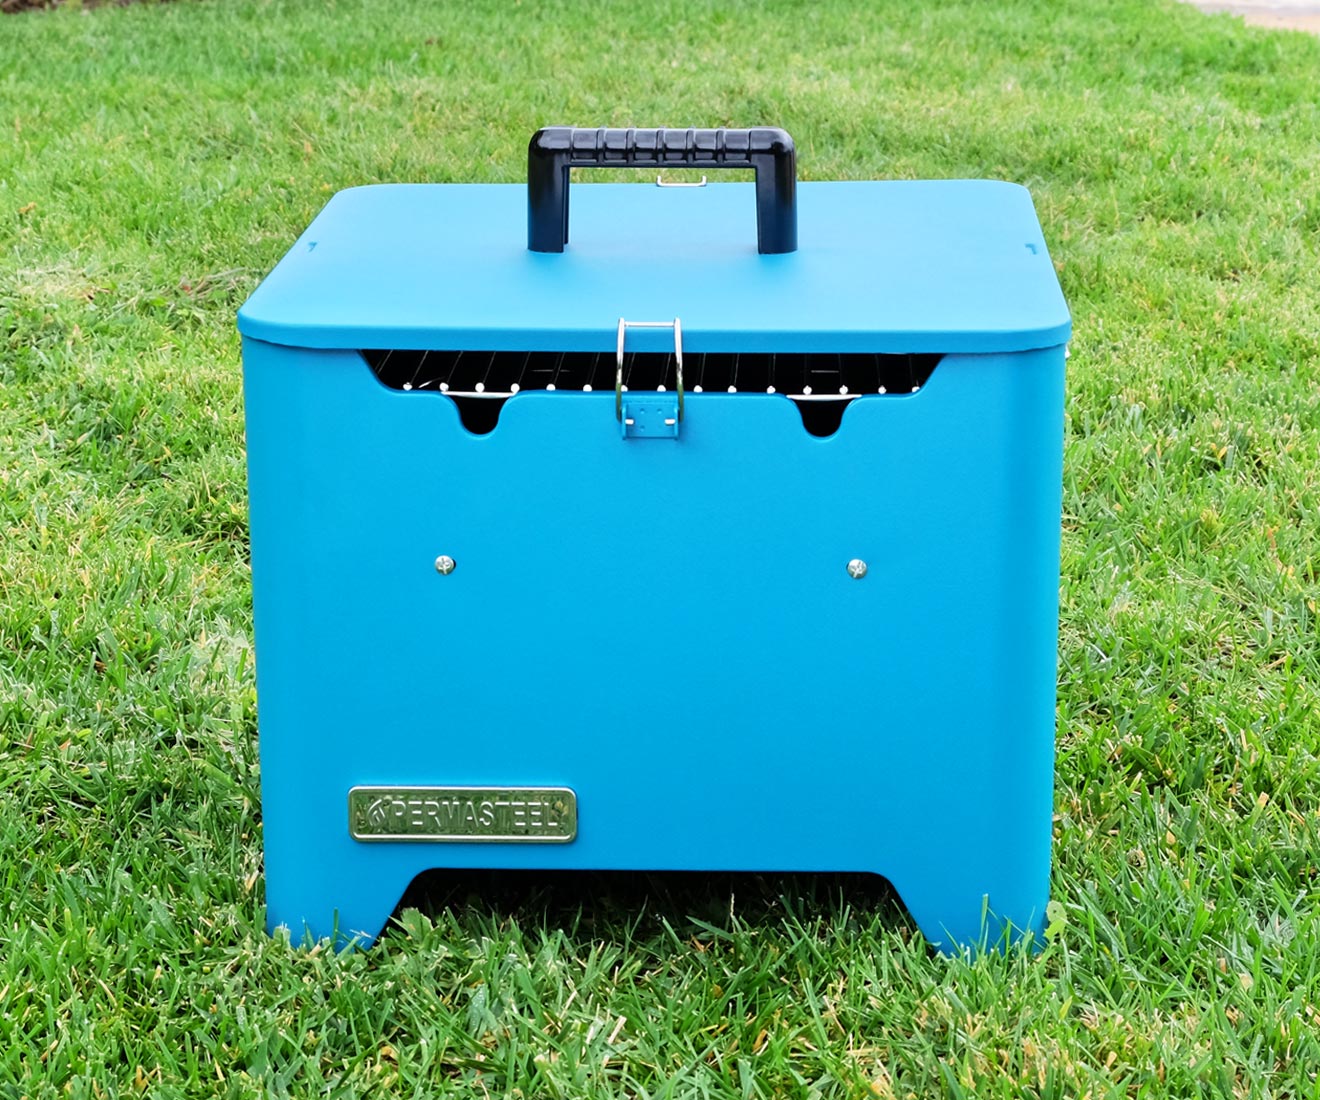 Permasteel Small Portable Charcoal Grill in Teal Lifestyle Image Picnic Beach Tailgating Environment